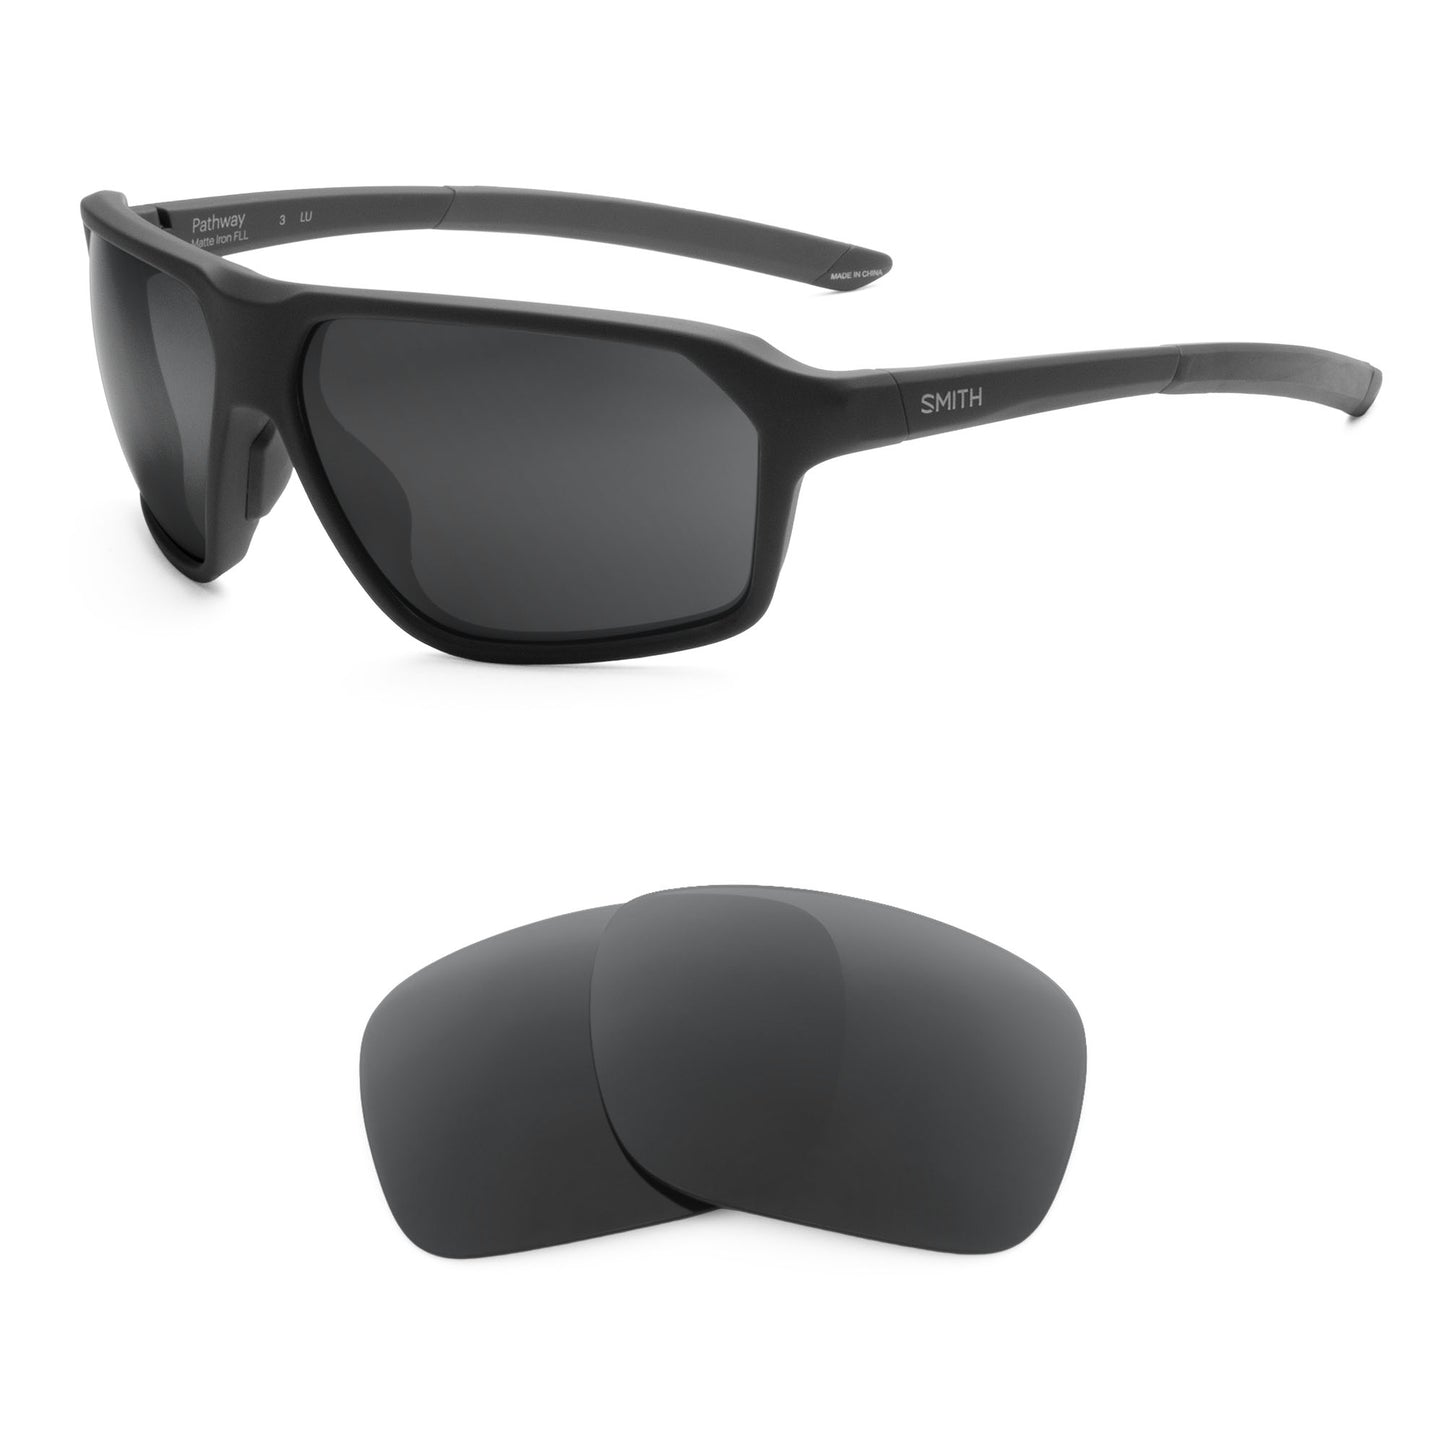 Smith Pathway sunglasses with replacement lenses